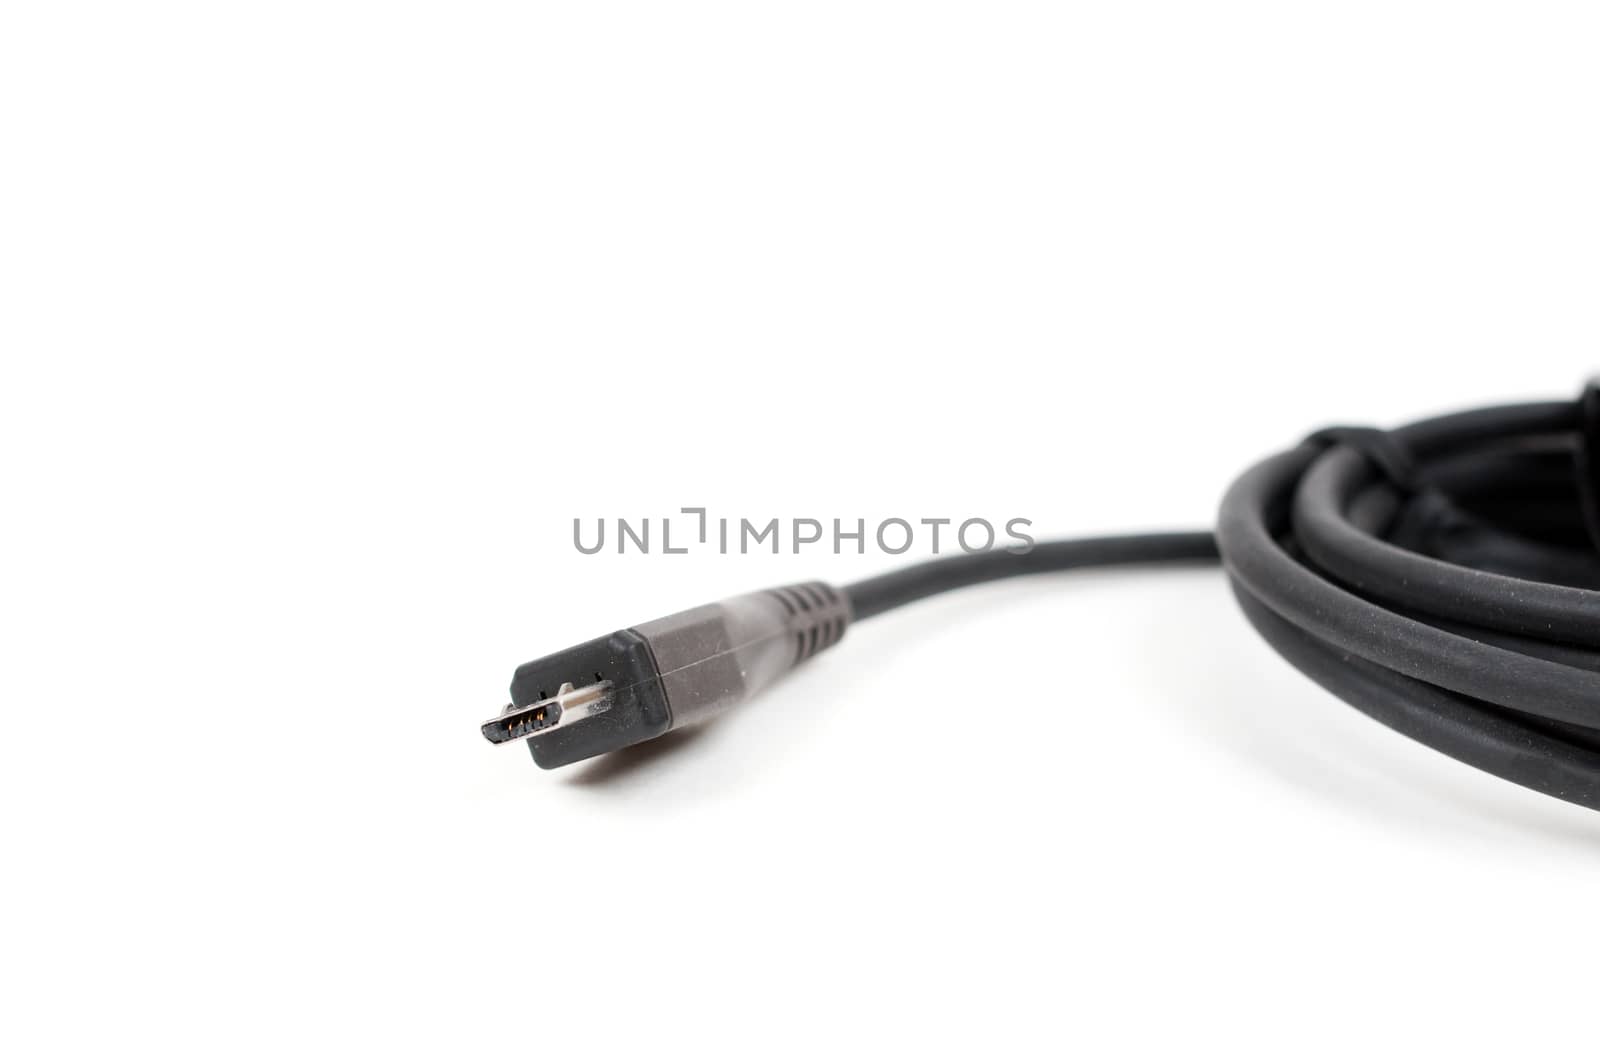 micro-usb plug and cable isolated on white background